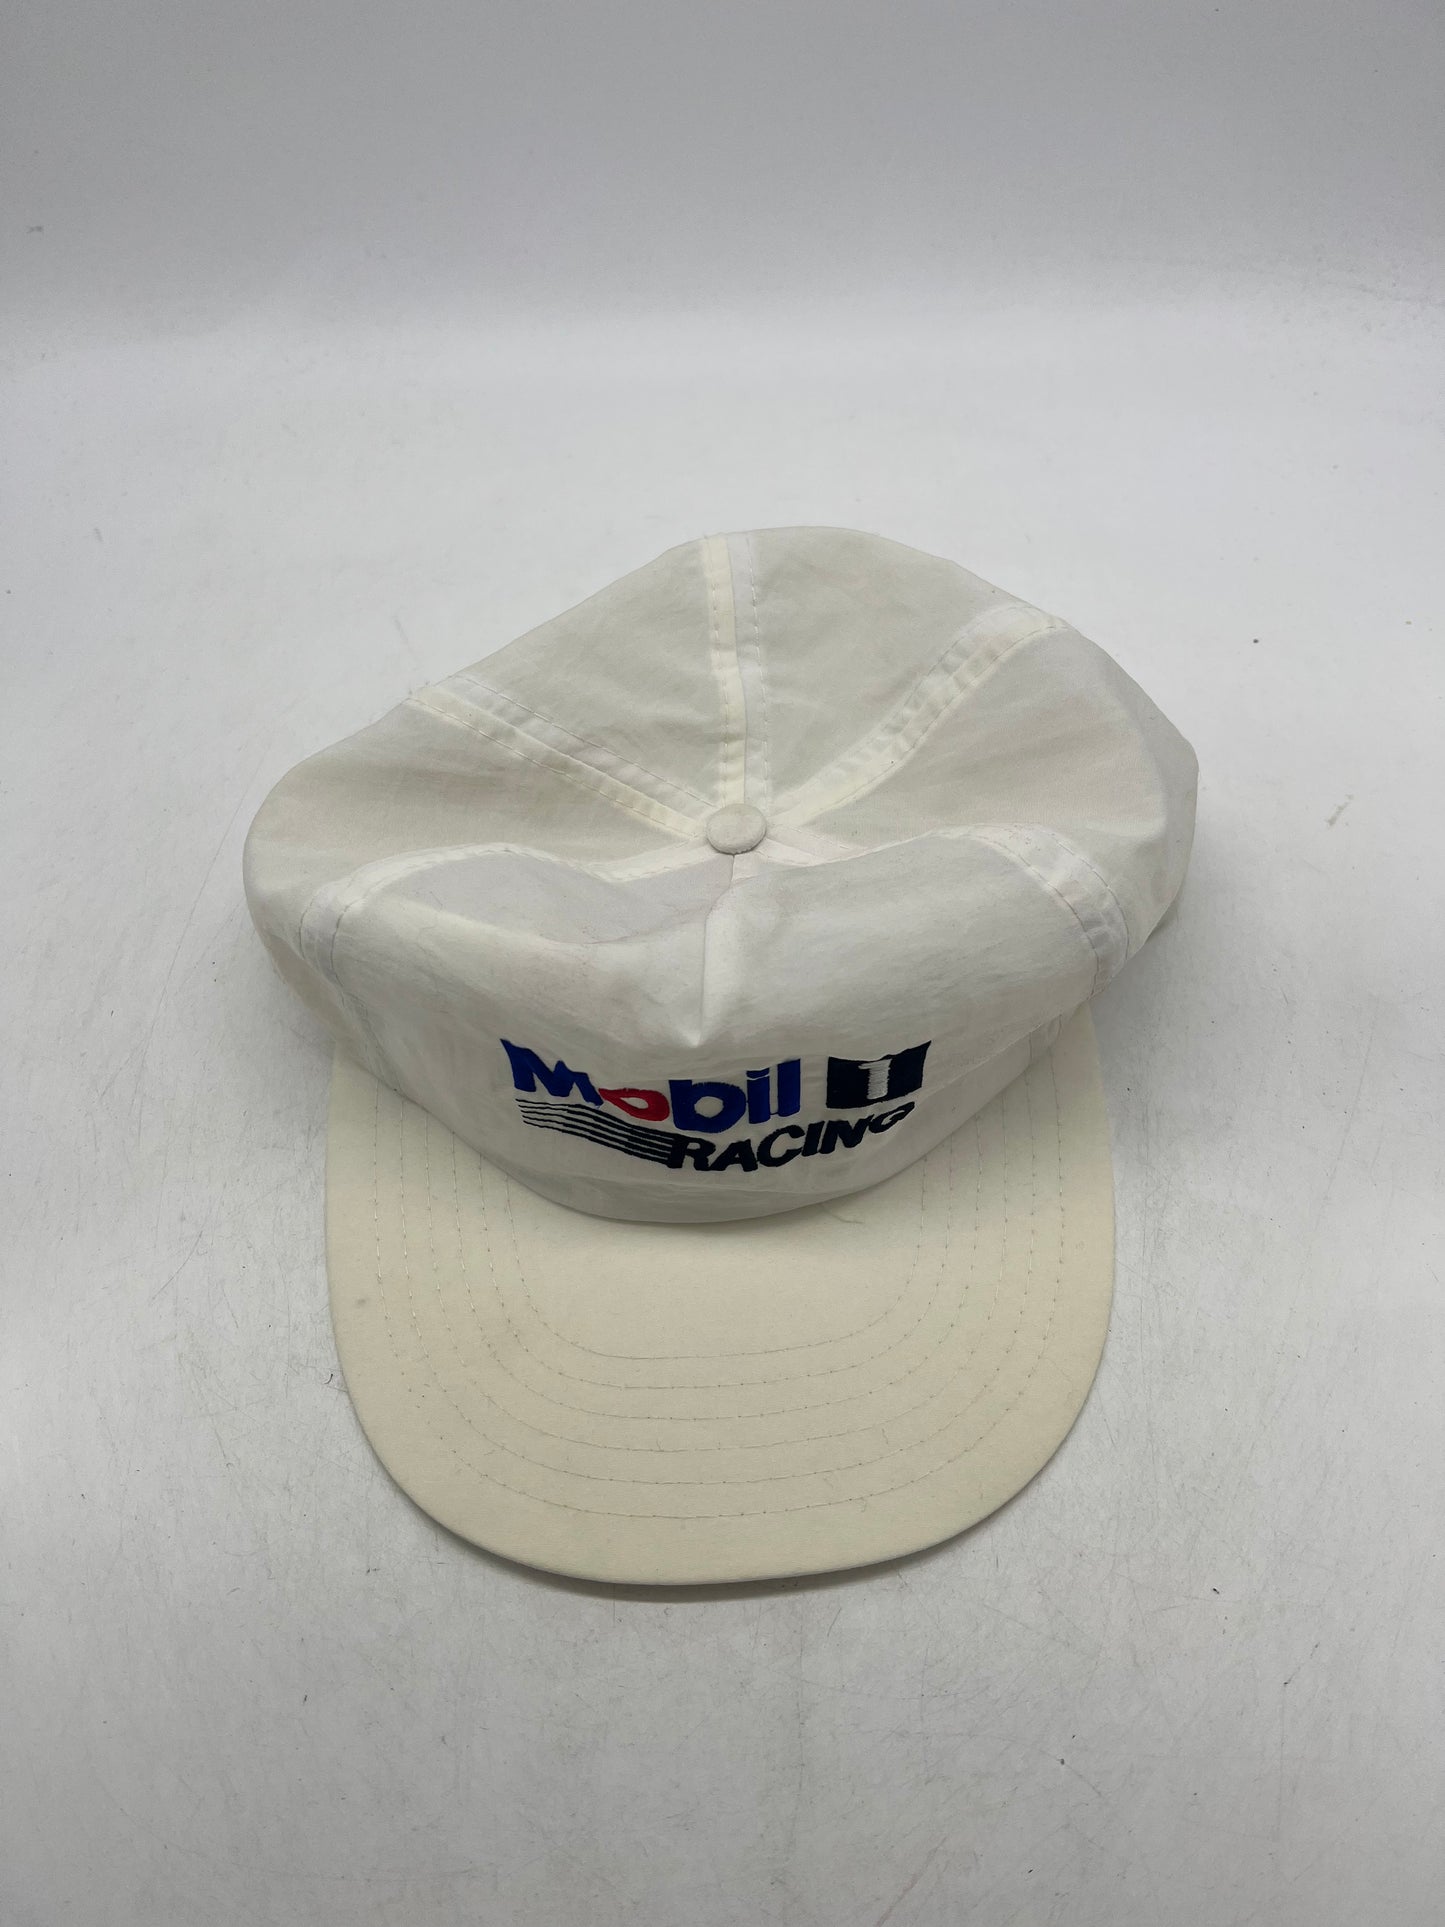 Load image into Gallery viewer, Vtg Mobil 1 Nylon Racing Hat
